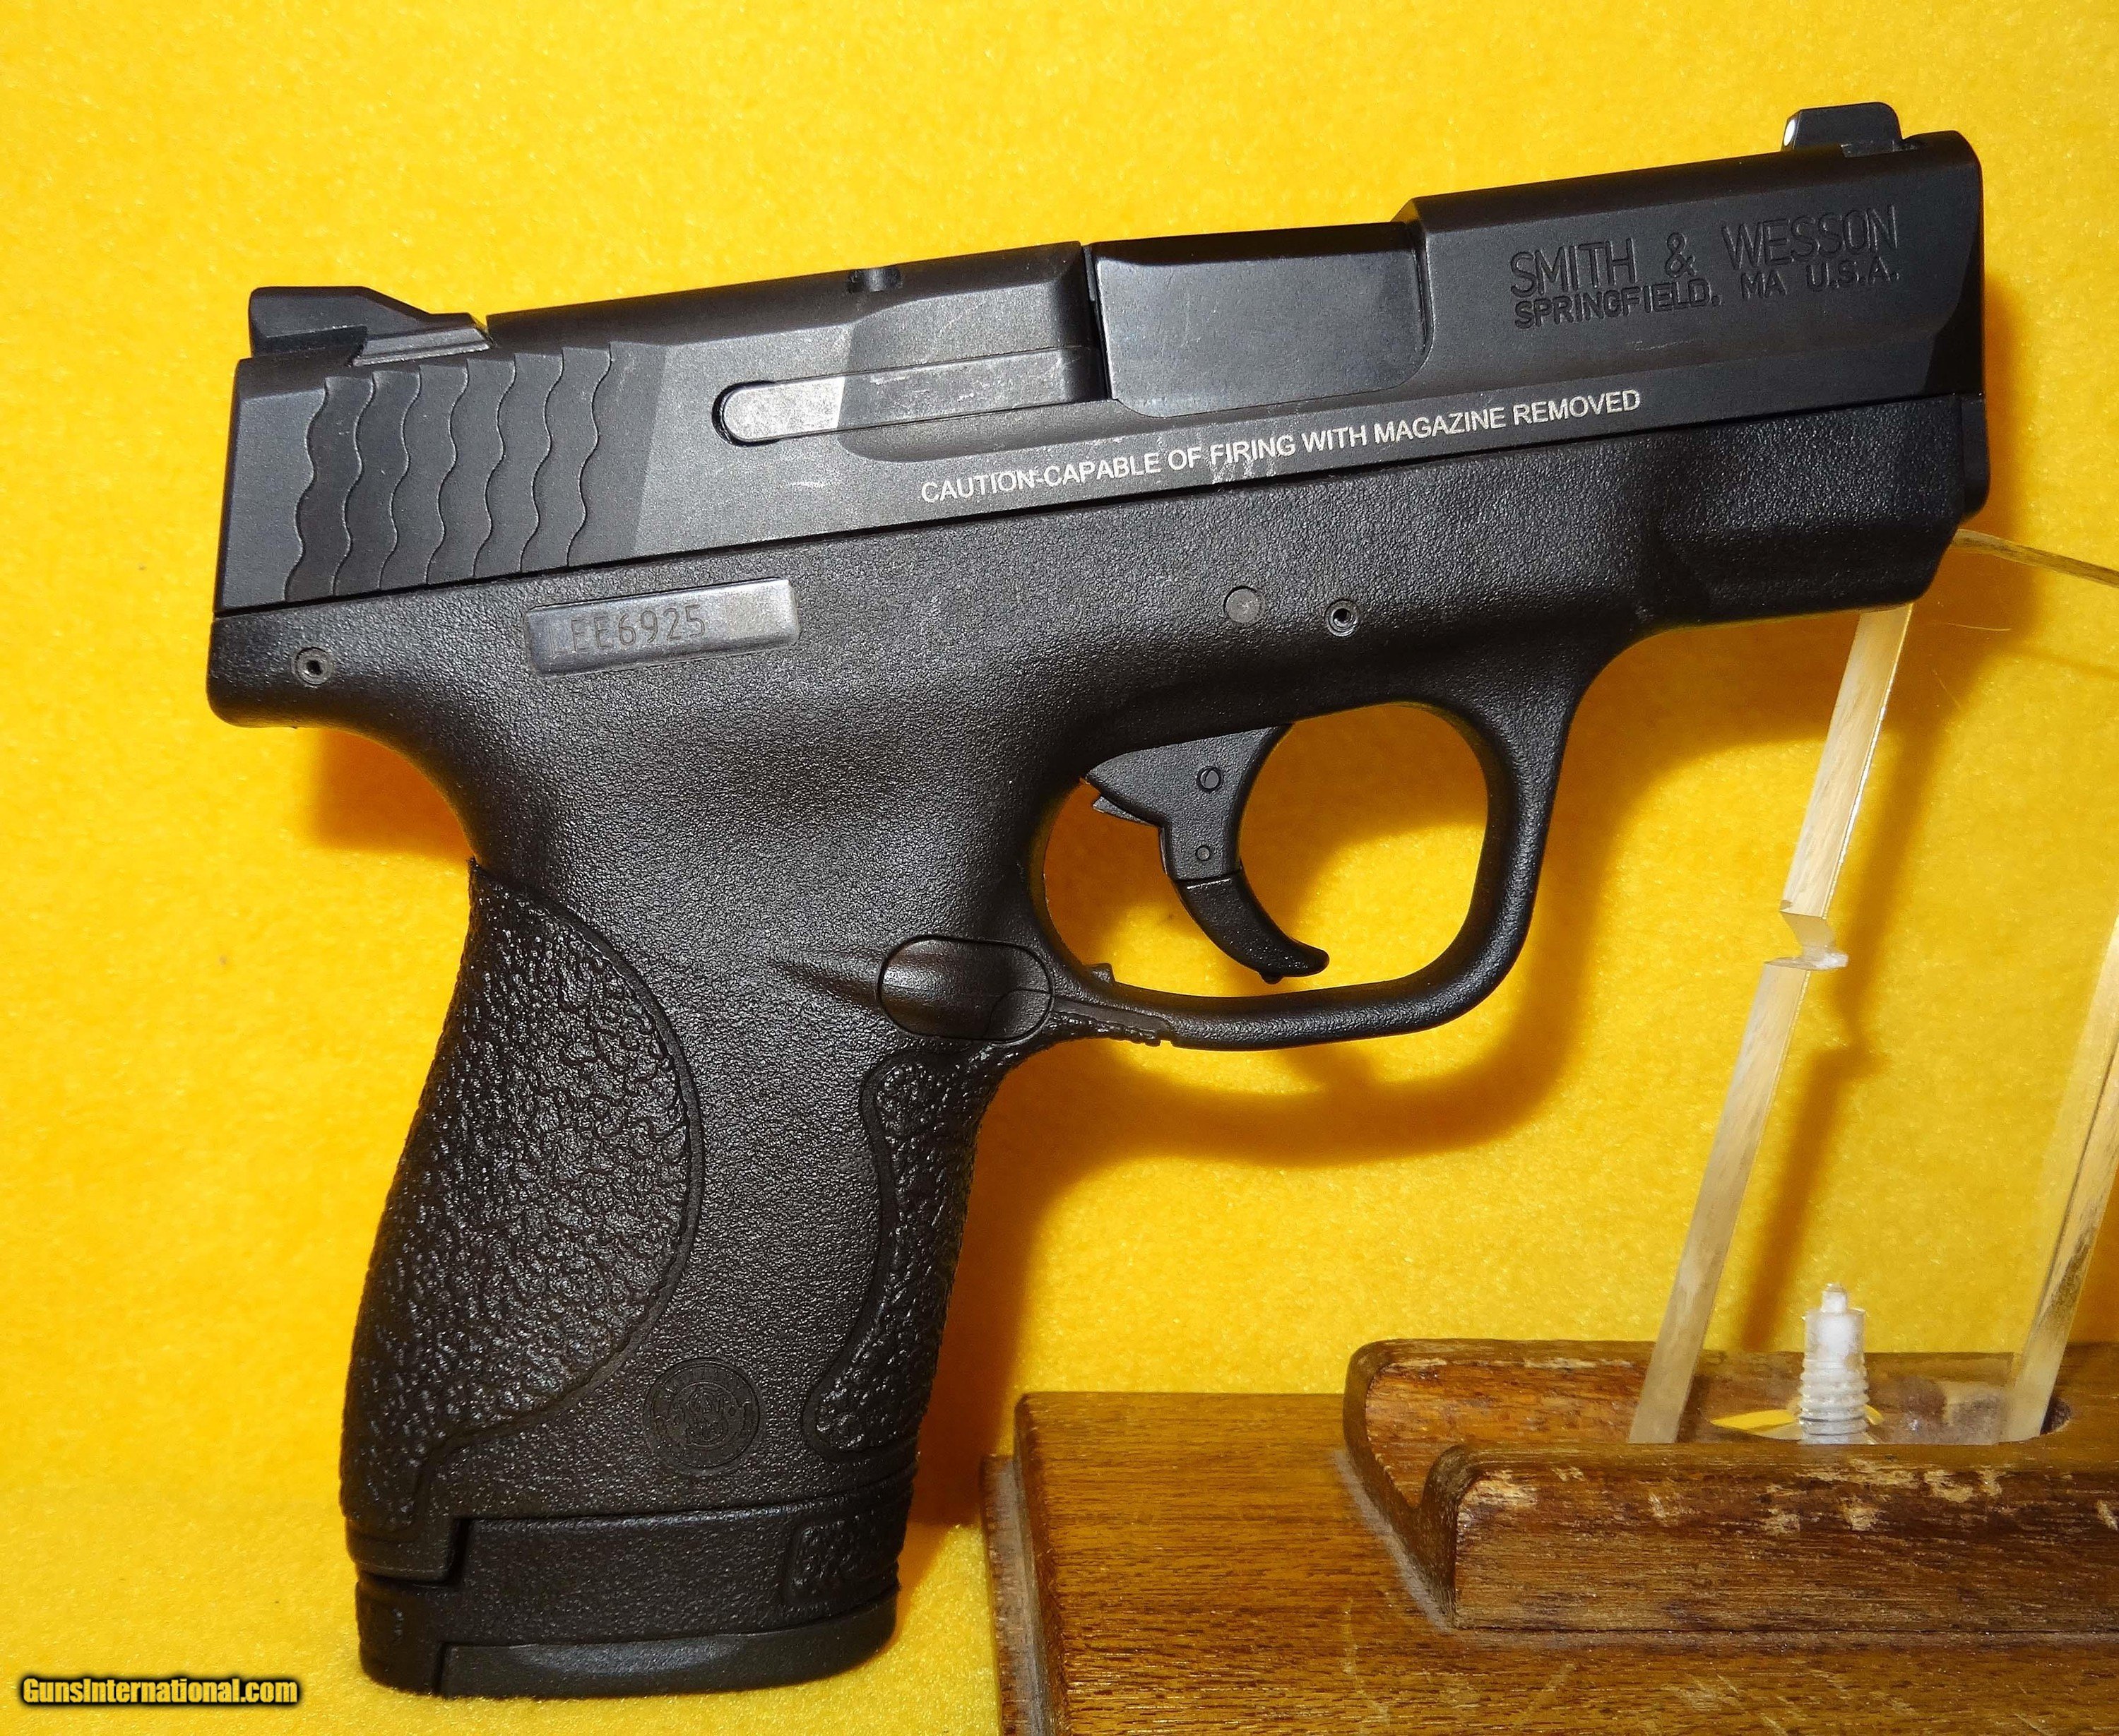 Smith and wesson m&p serial number lookup